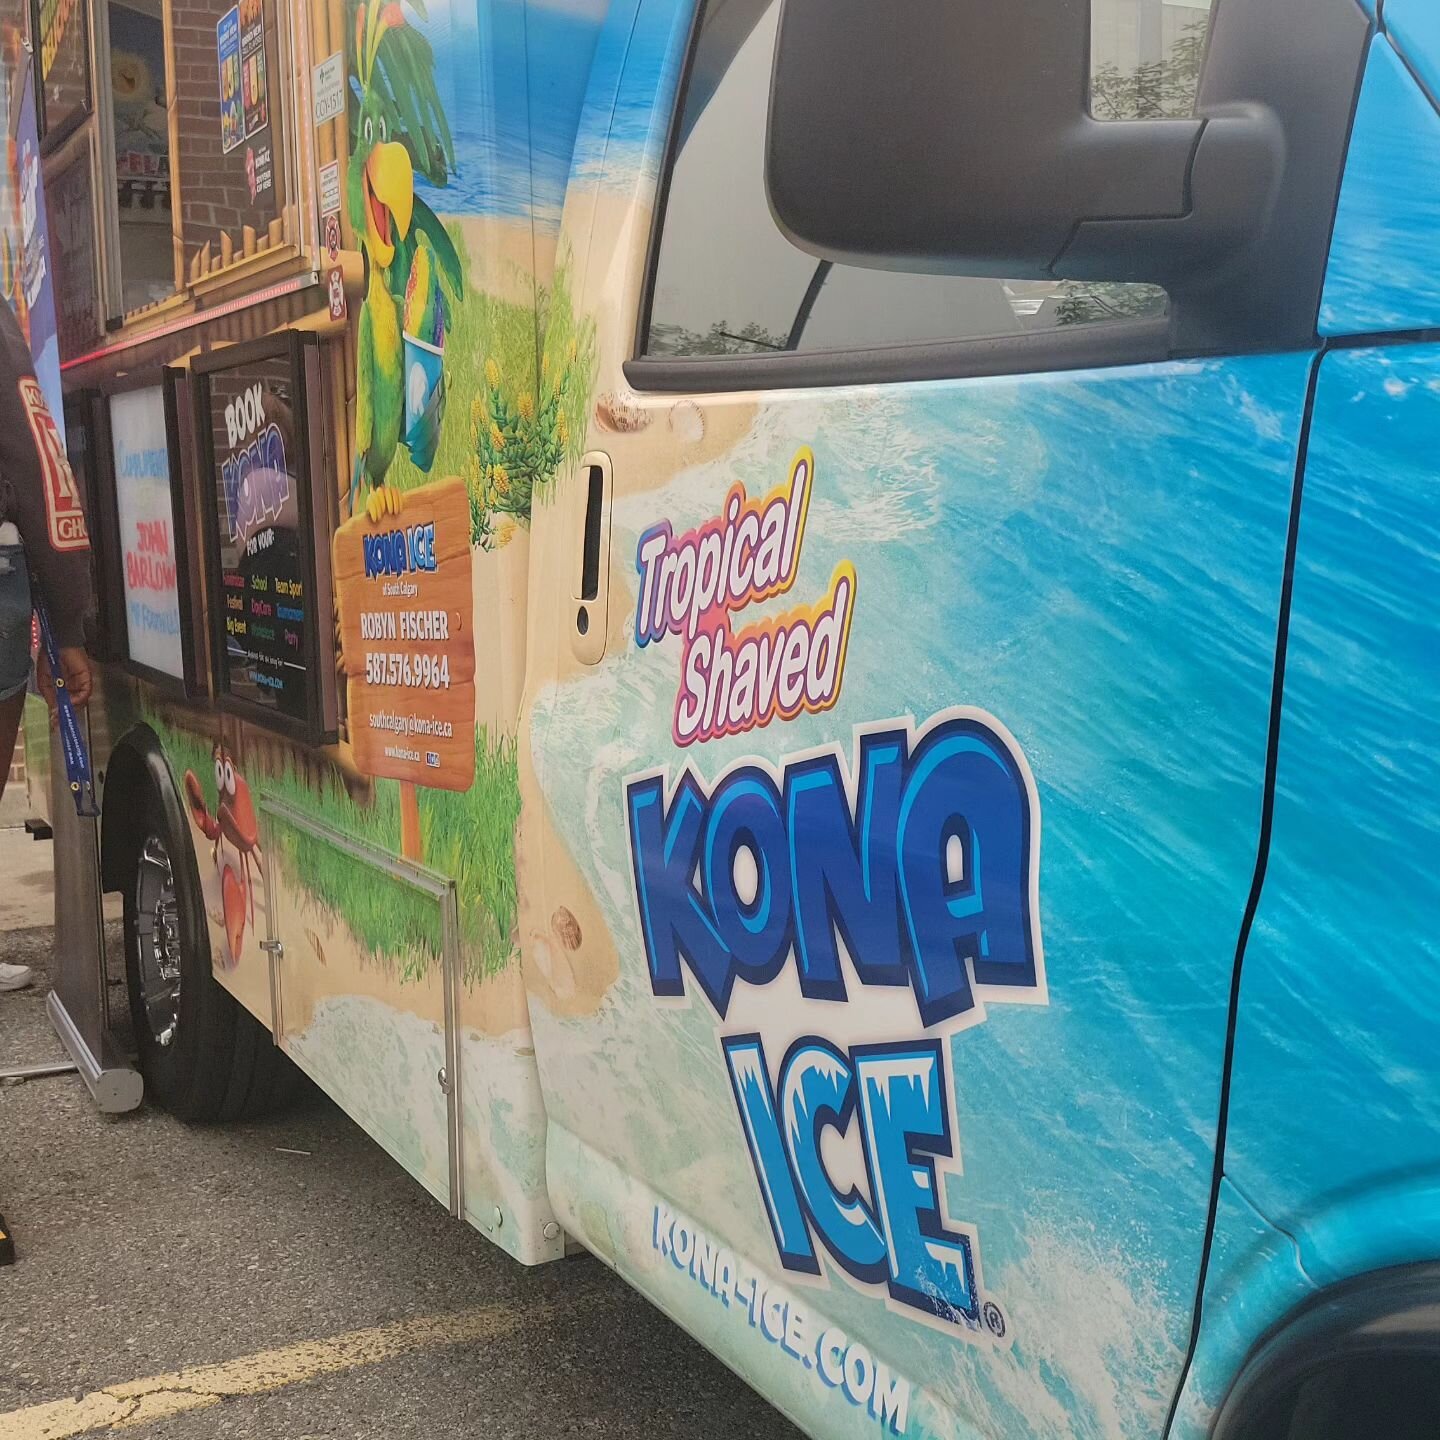 Spotted!
Chamber member @konaiceofsouthcalgary on 4th Ave SW.
Across from our office and members @workfreshhr and @freshlypressedyyc 

What a parade!

#littlebritchesparade2023 #HighRiver